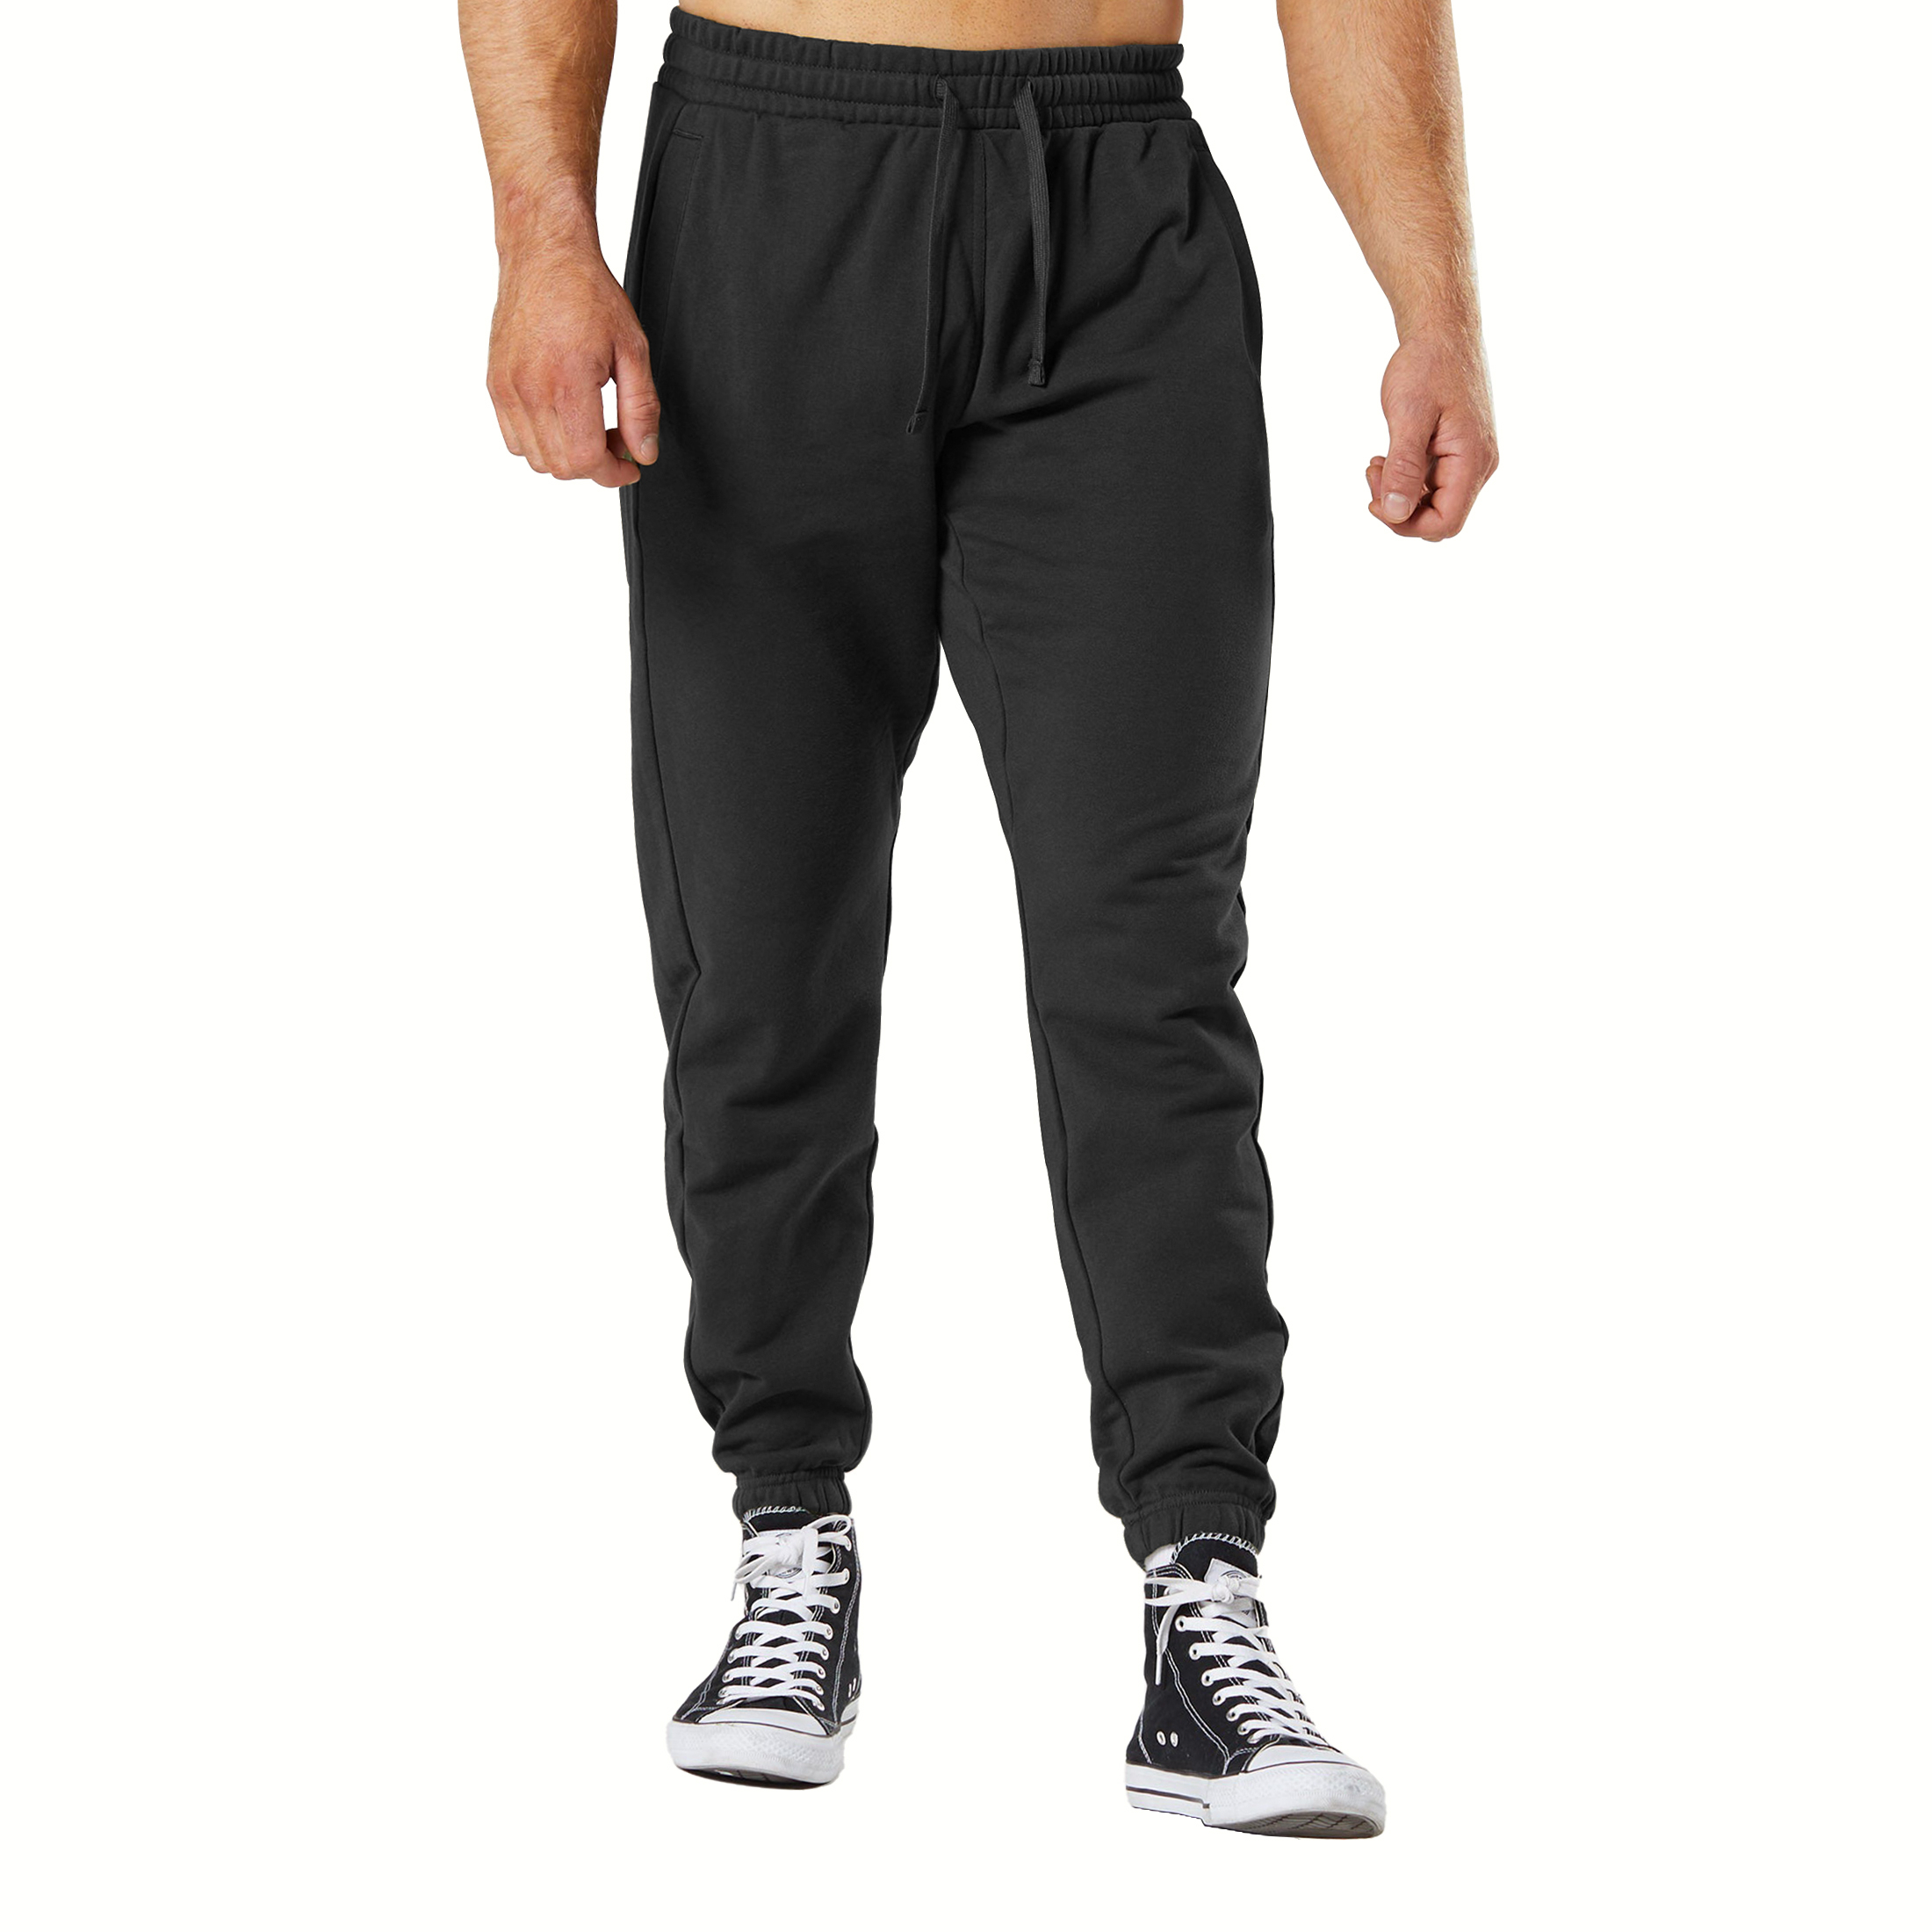 3-Pack: Men's Casual Fleece-Lined Elastic Bottom Sweatpants Jogger Pants With Pockets - Solid & Stripes, X-Large